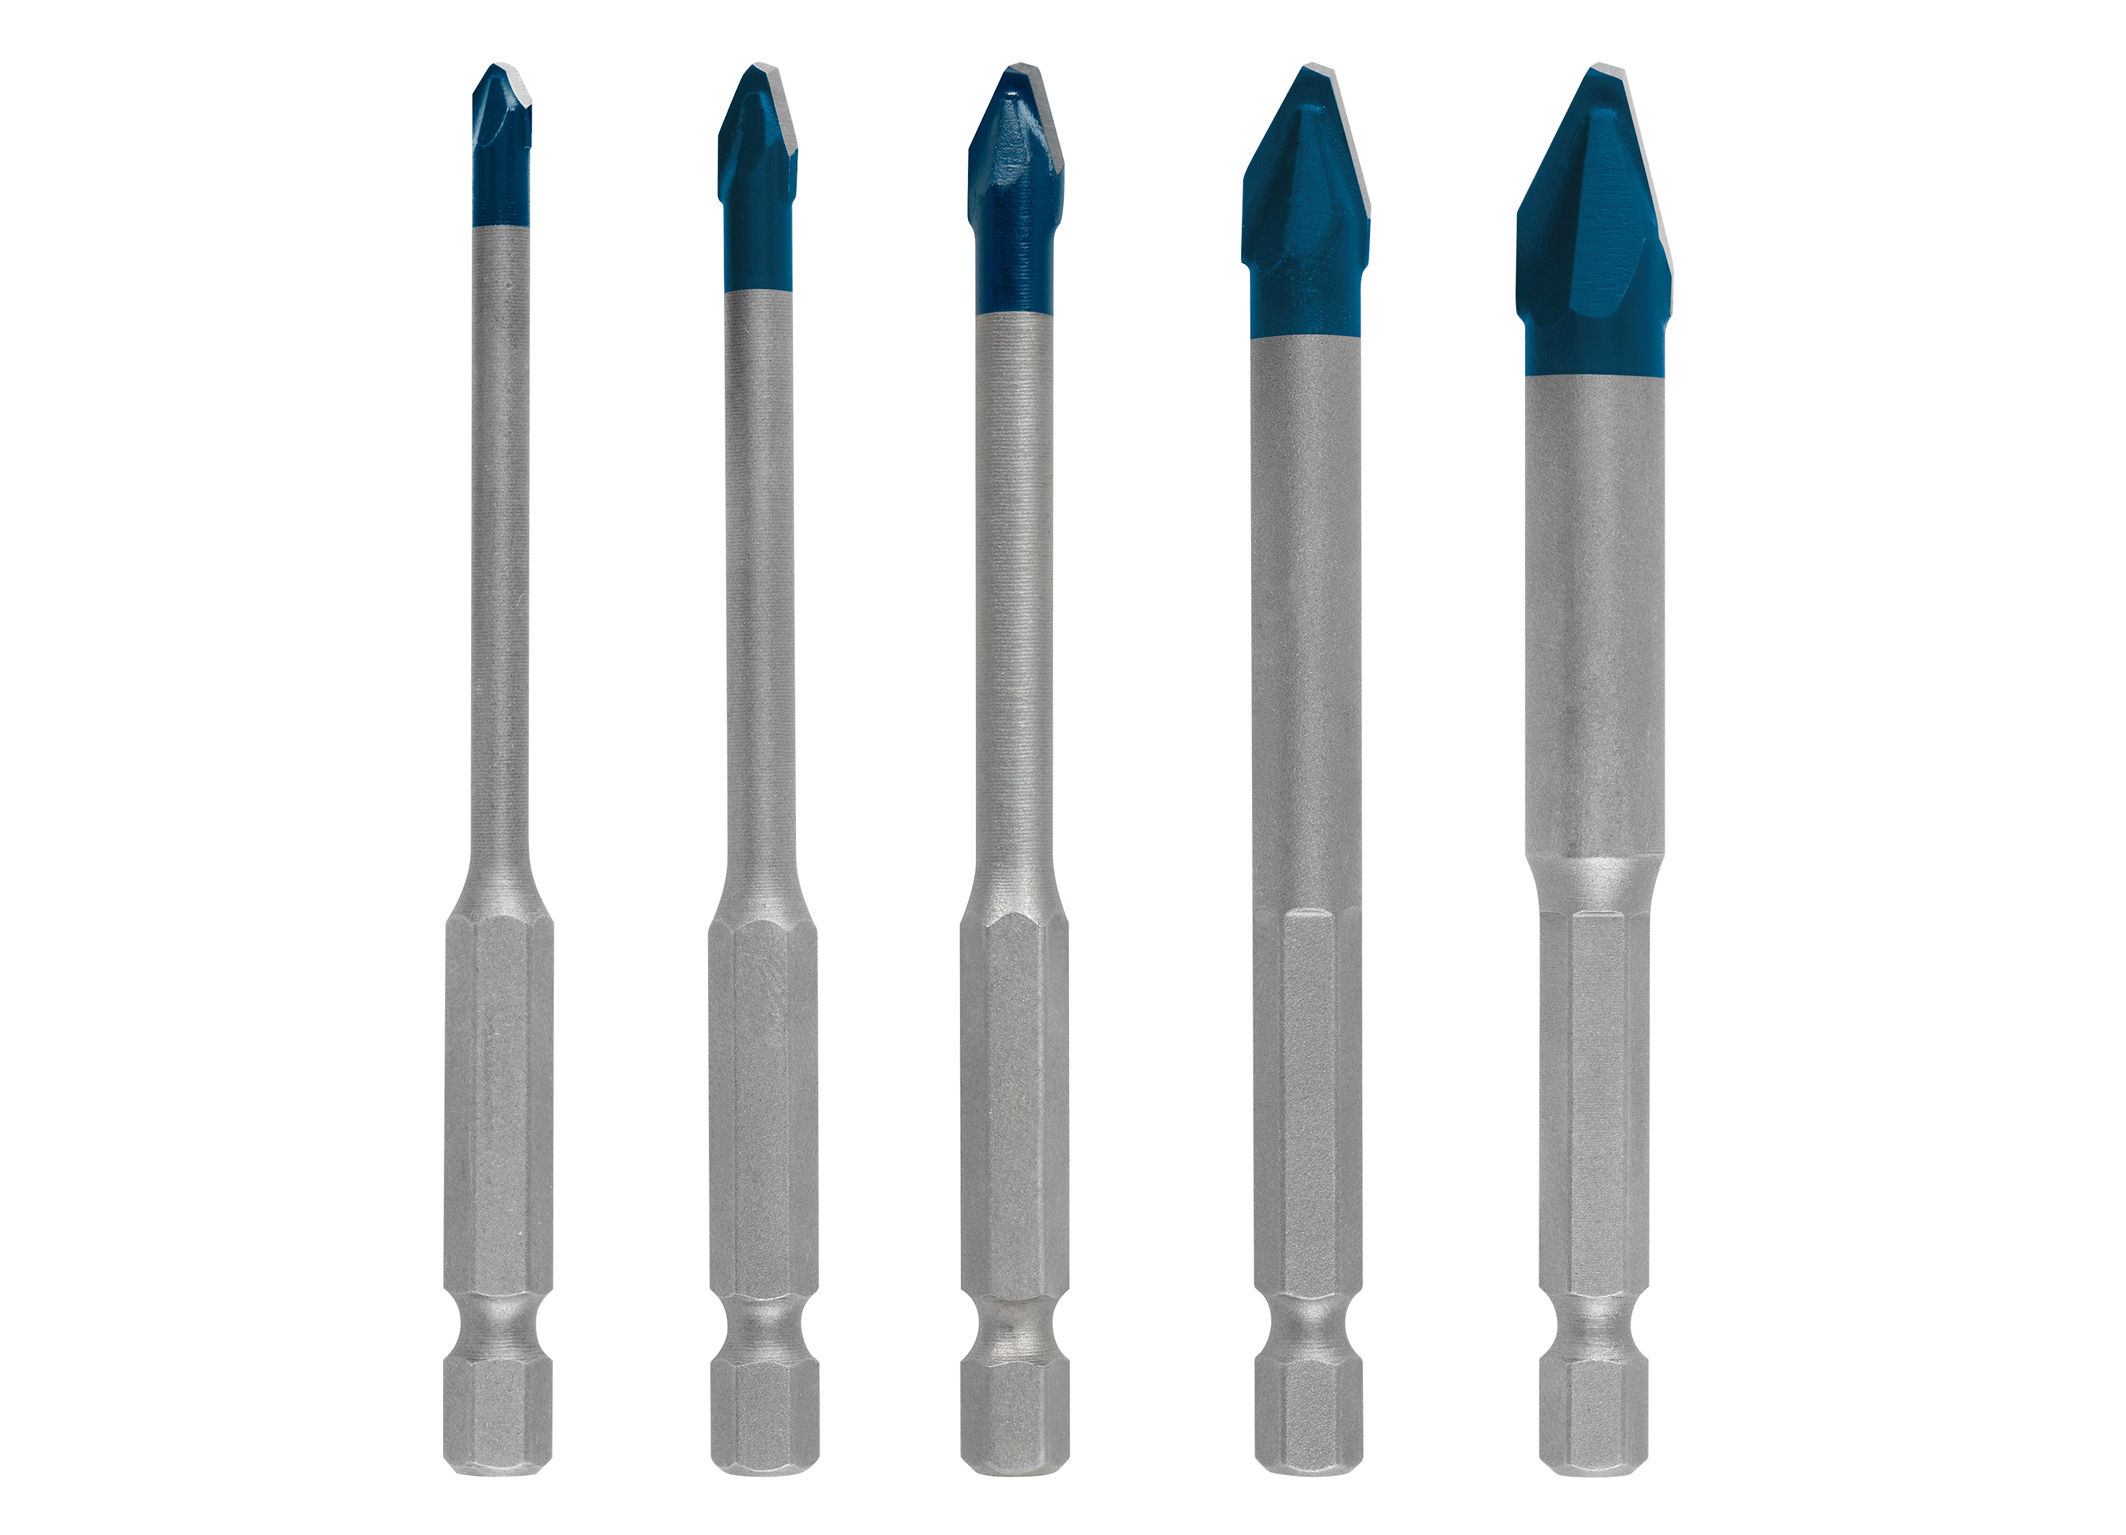 Key technologies from Bosch make Expert accessories superior: “Expert HEX-9 HardCeramic” tile drill bits with carbide technology